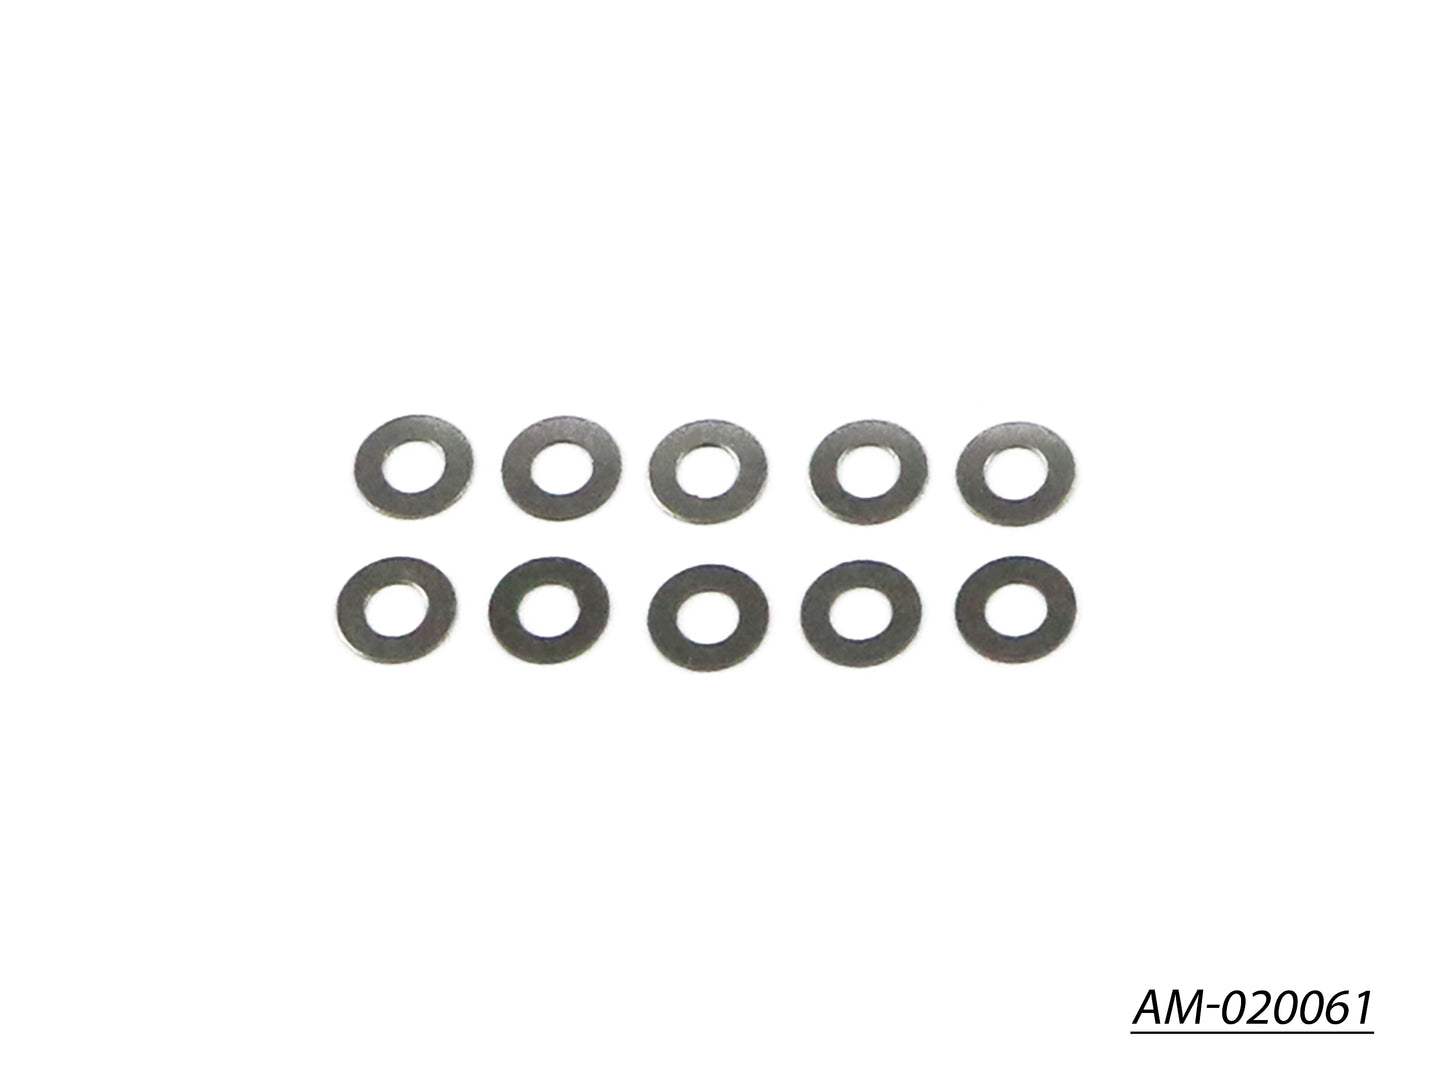 Stainless Steel Shims 3 x 6 x 0.1 (10) (AM-020061)